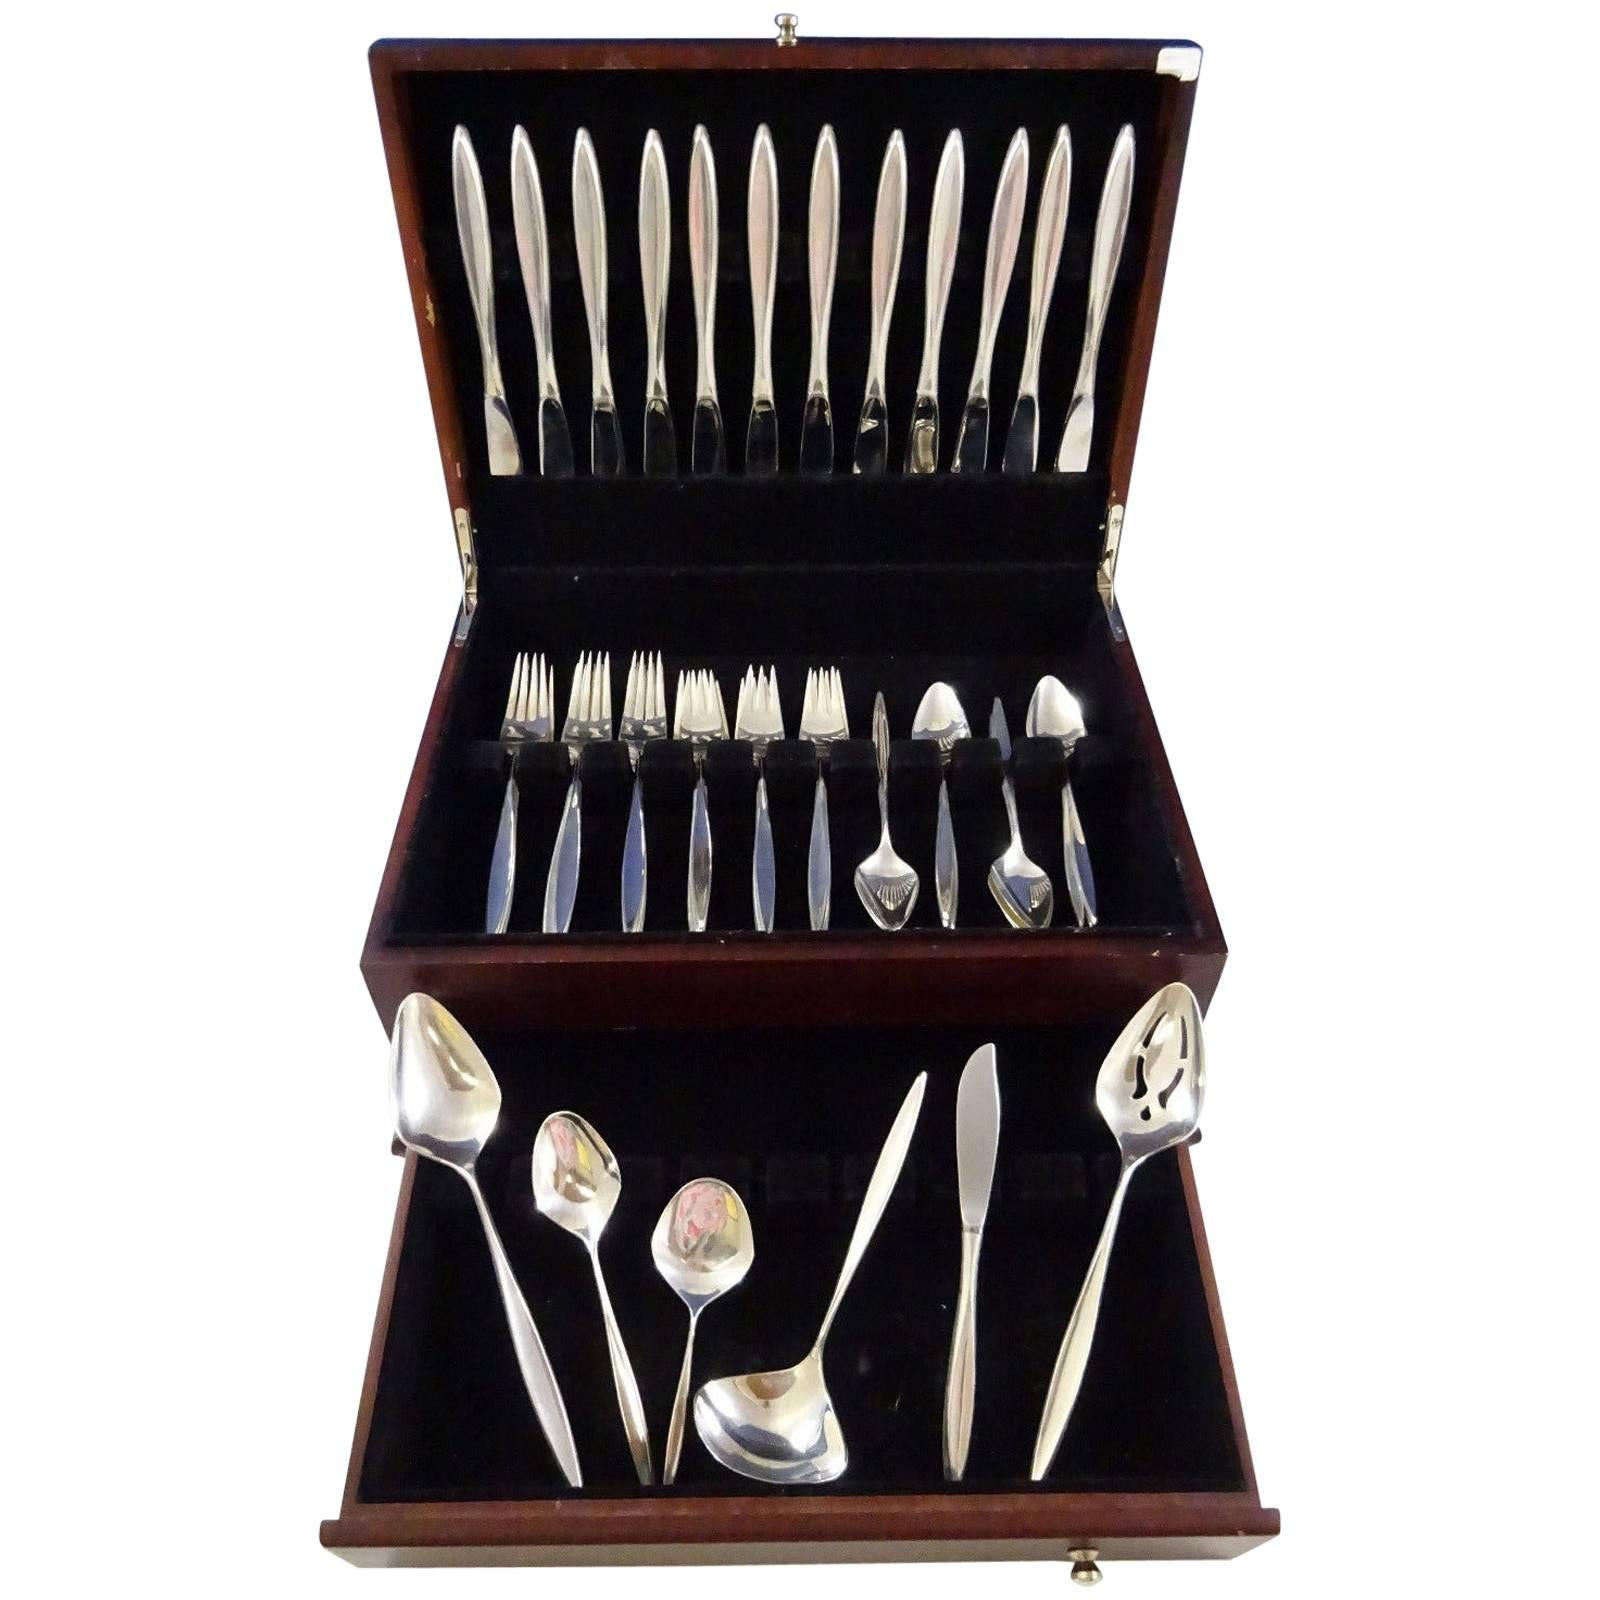 Mid-Century Modern Crystal by International sterling silver flatware set of 54 pieces. This set includes:

12 knives, 9 1/4